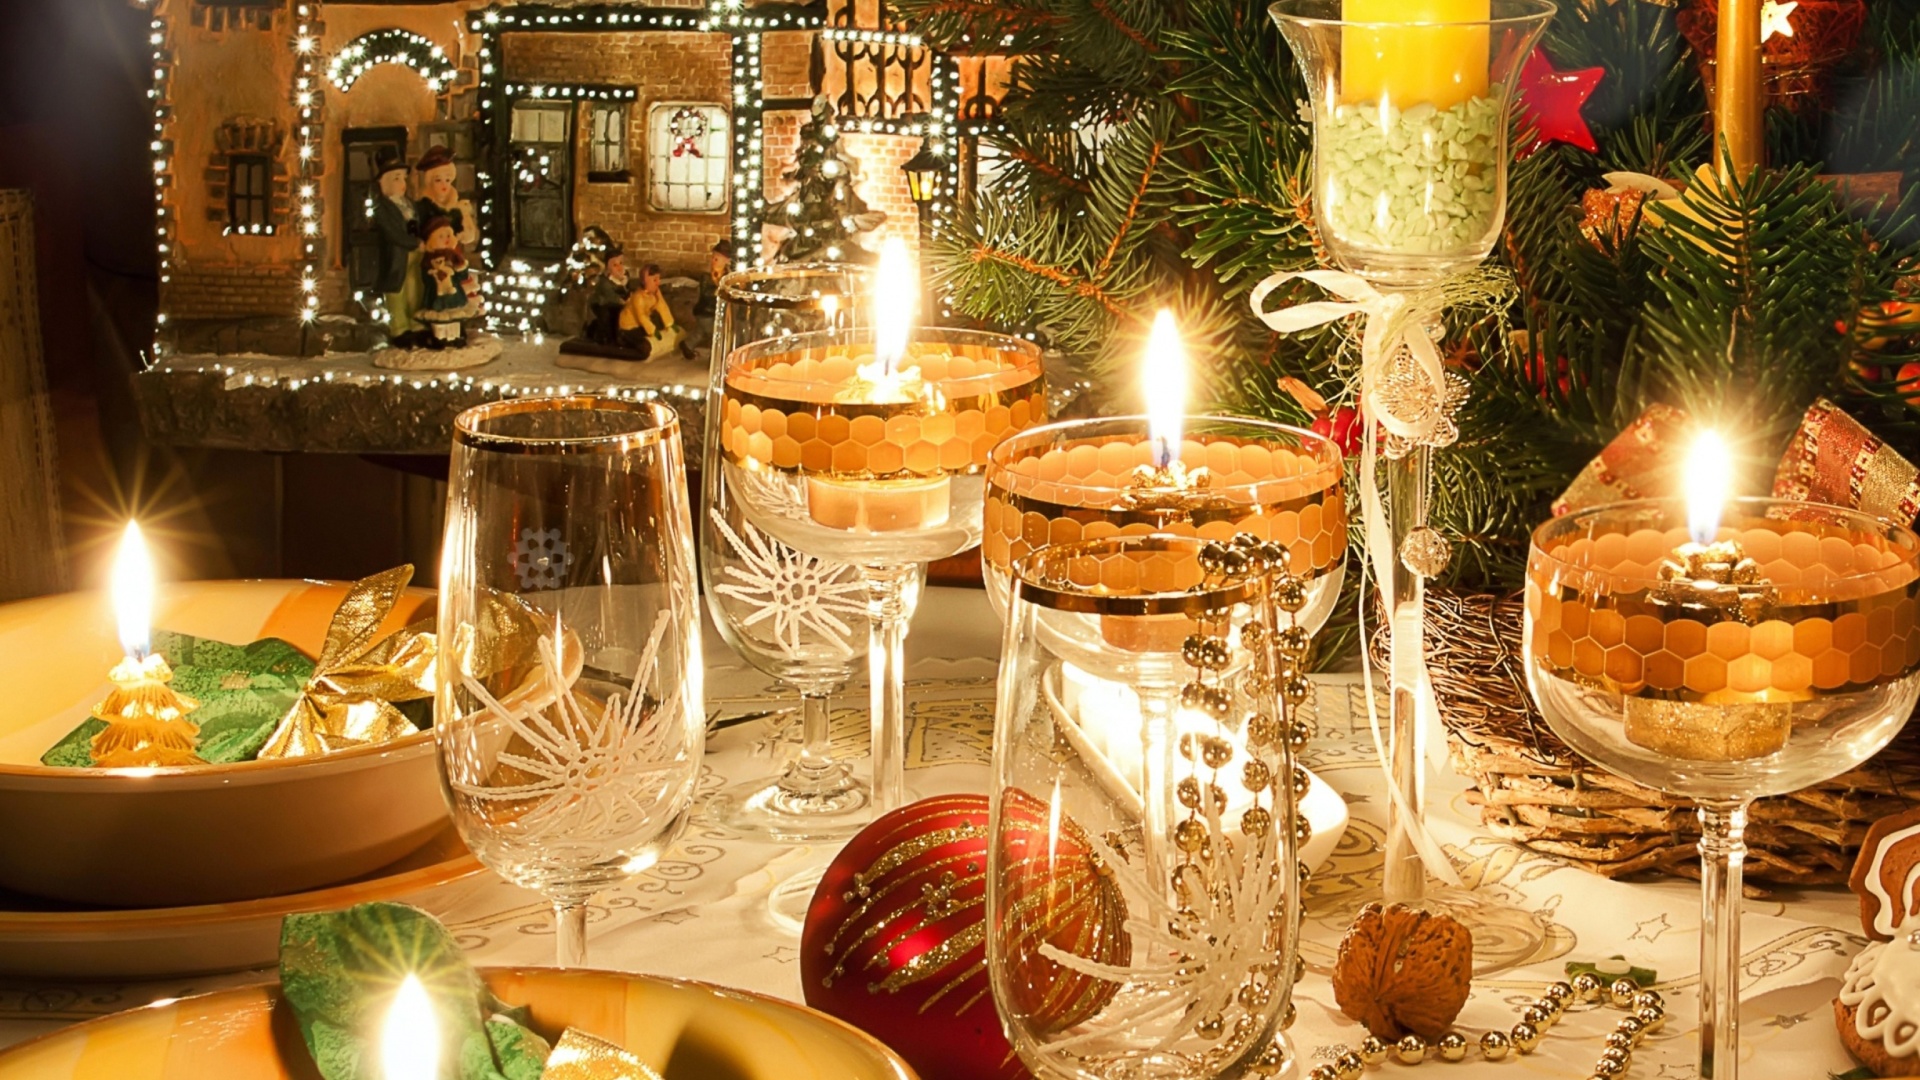 Rich New Year table wallpaper 1920x1080